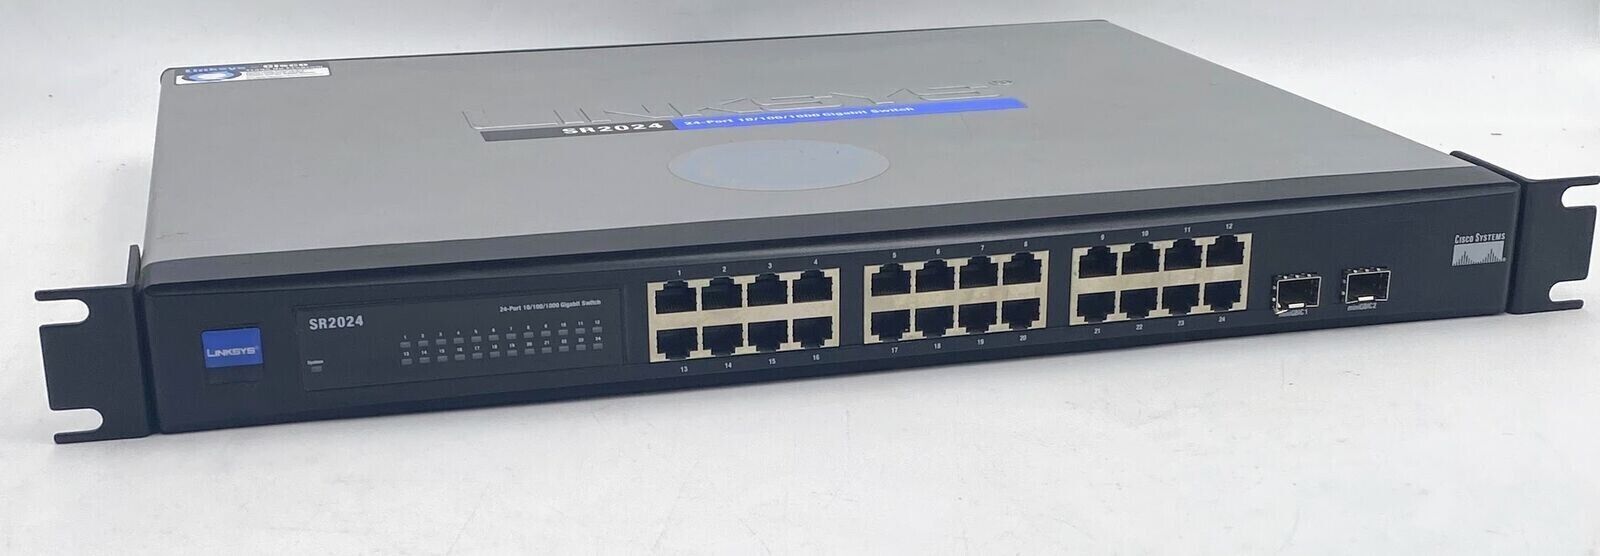 Linksys | SR2024 | 24-Port 10/100/1000 Gigabit Network Switch with Power Cable